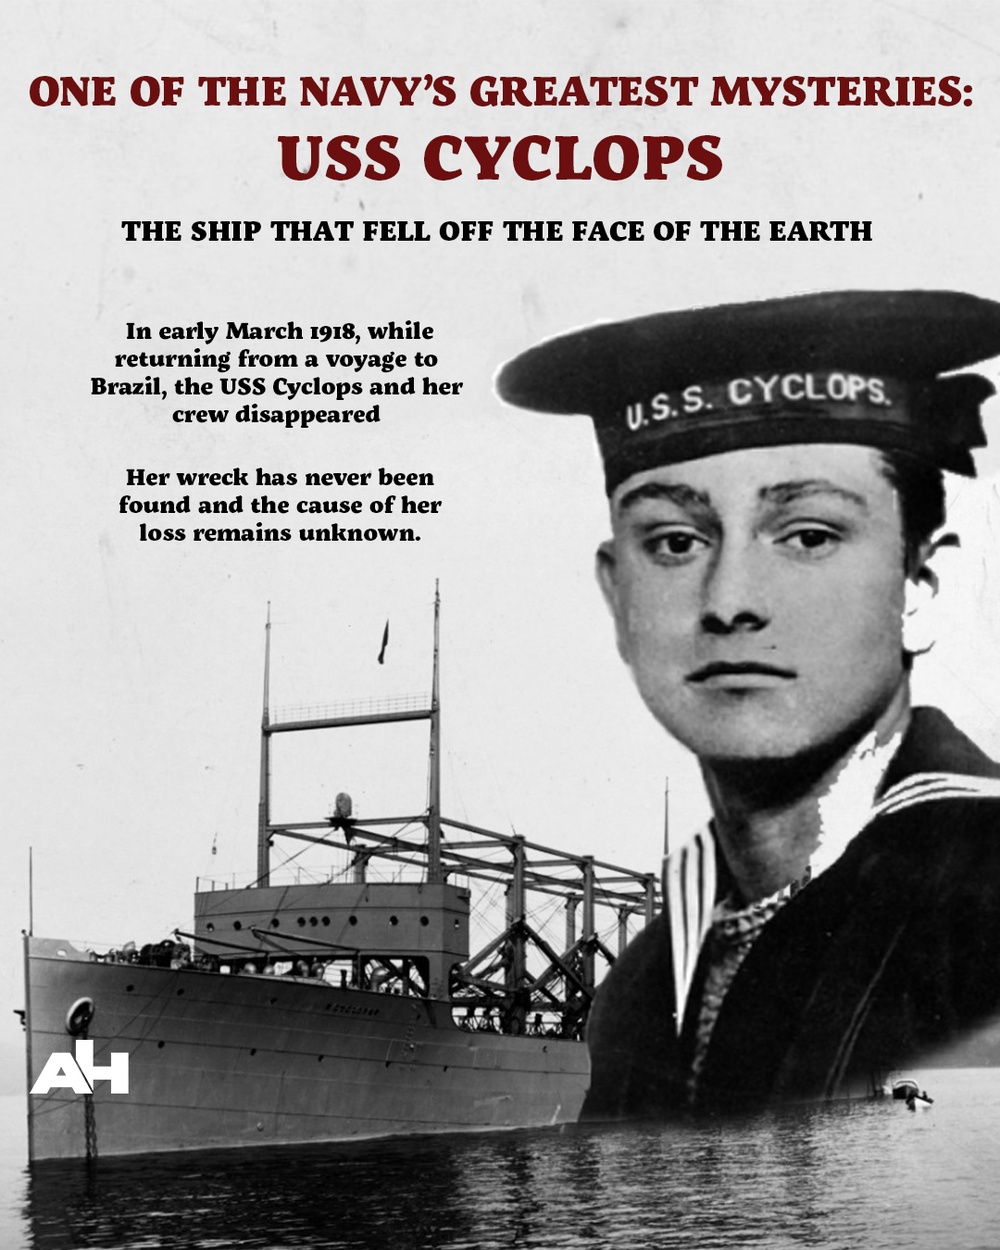 USS Cyclops; The ship that fell off the face of the earth